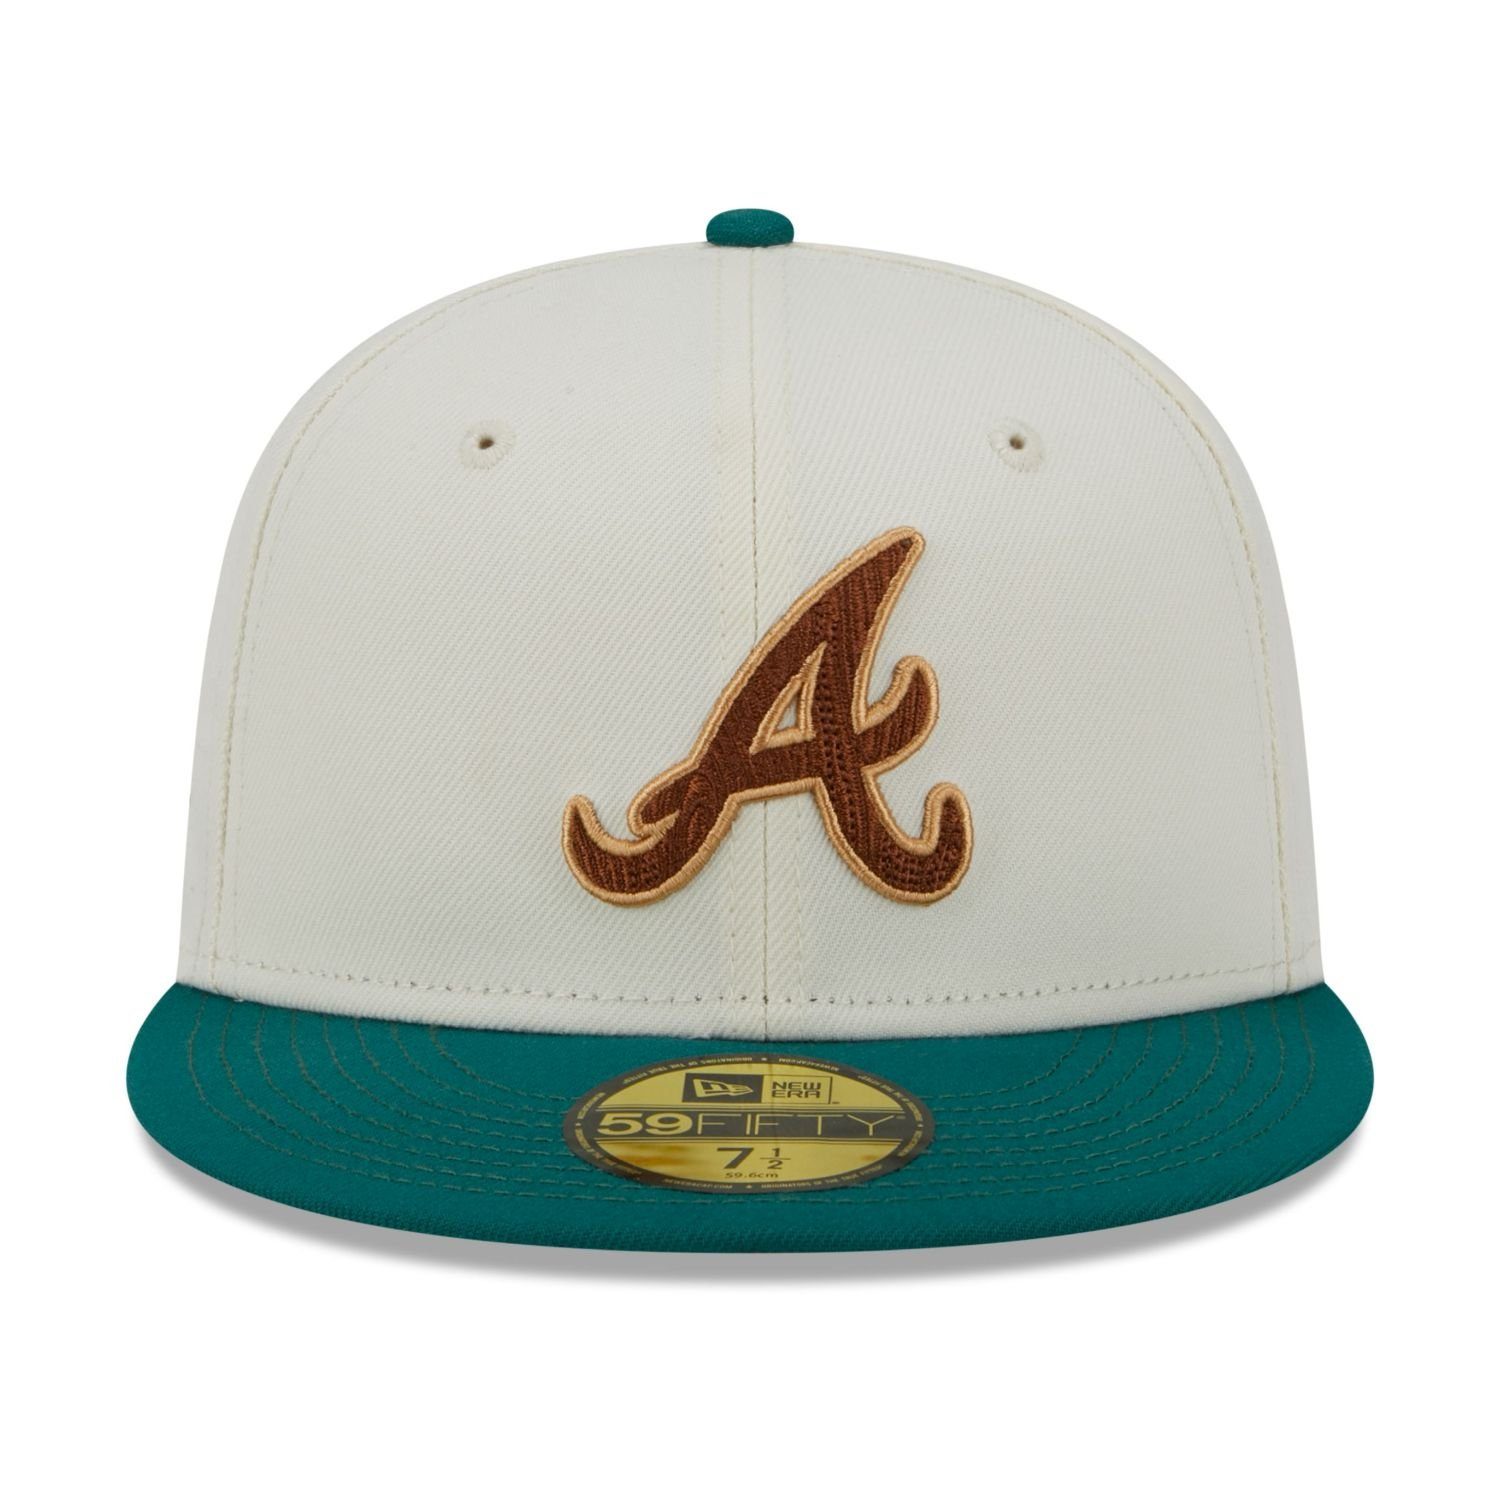 CAMP Cap Fitted Atlanta Braves New 59Fifty Era